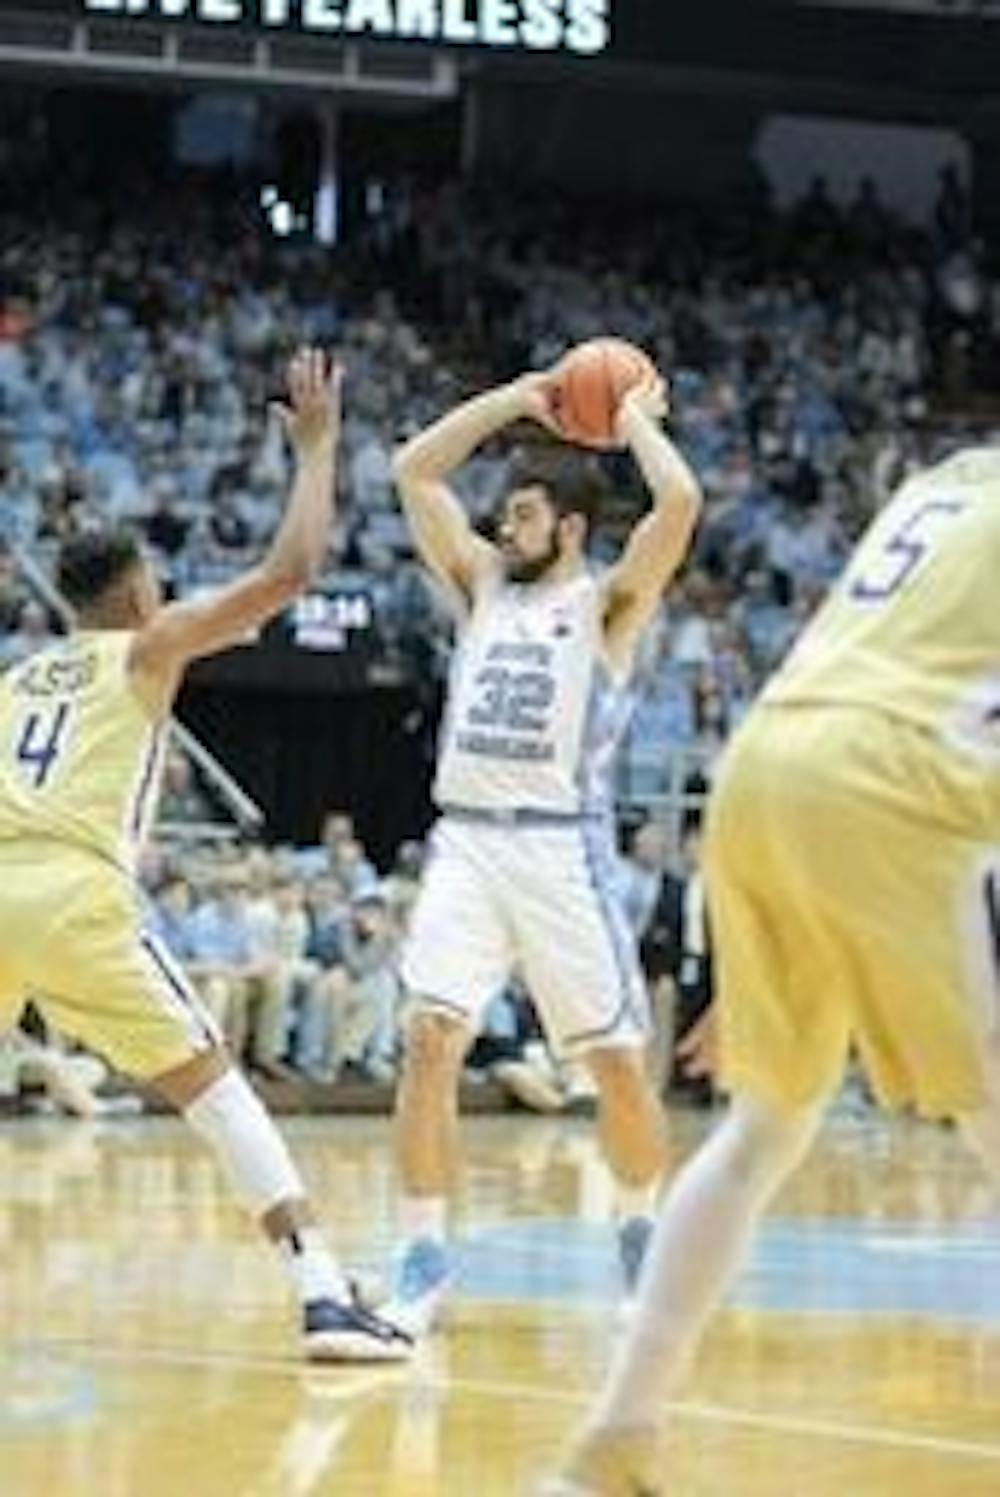 <p>Luke Maye (32) goes to pass the ball during the Georgia Tech game at the Dean Smith Center on Saturday.&nbsp;</p>